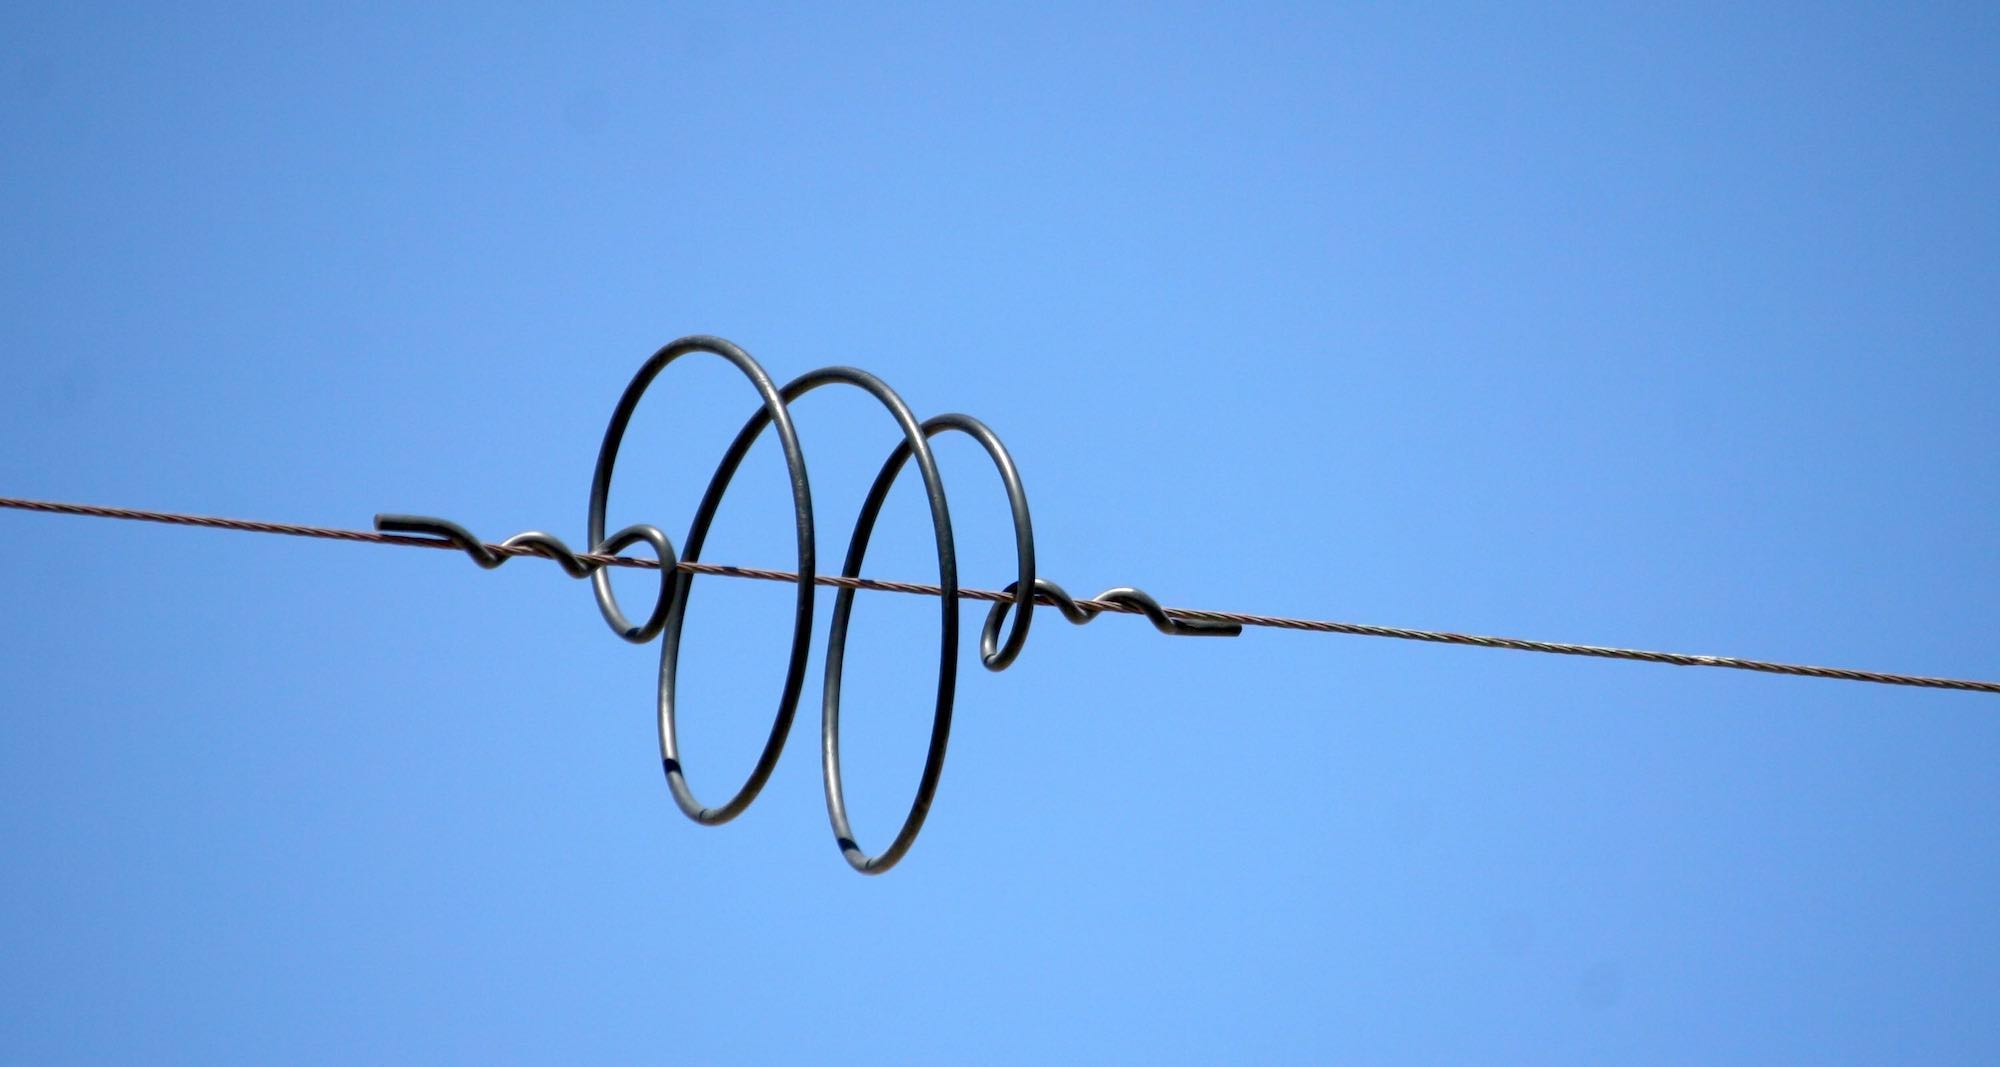 A coil of wire looped around a power cable.